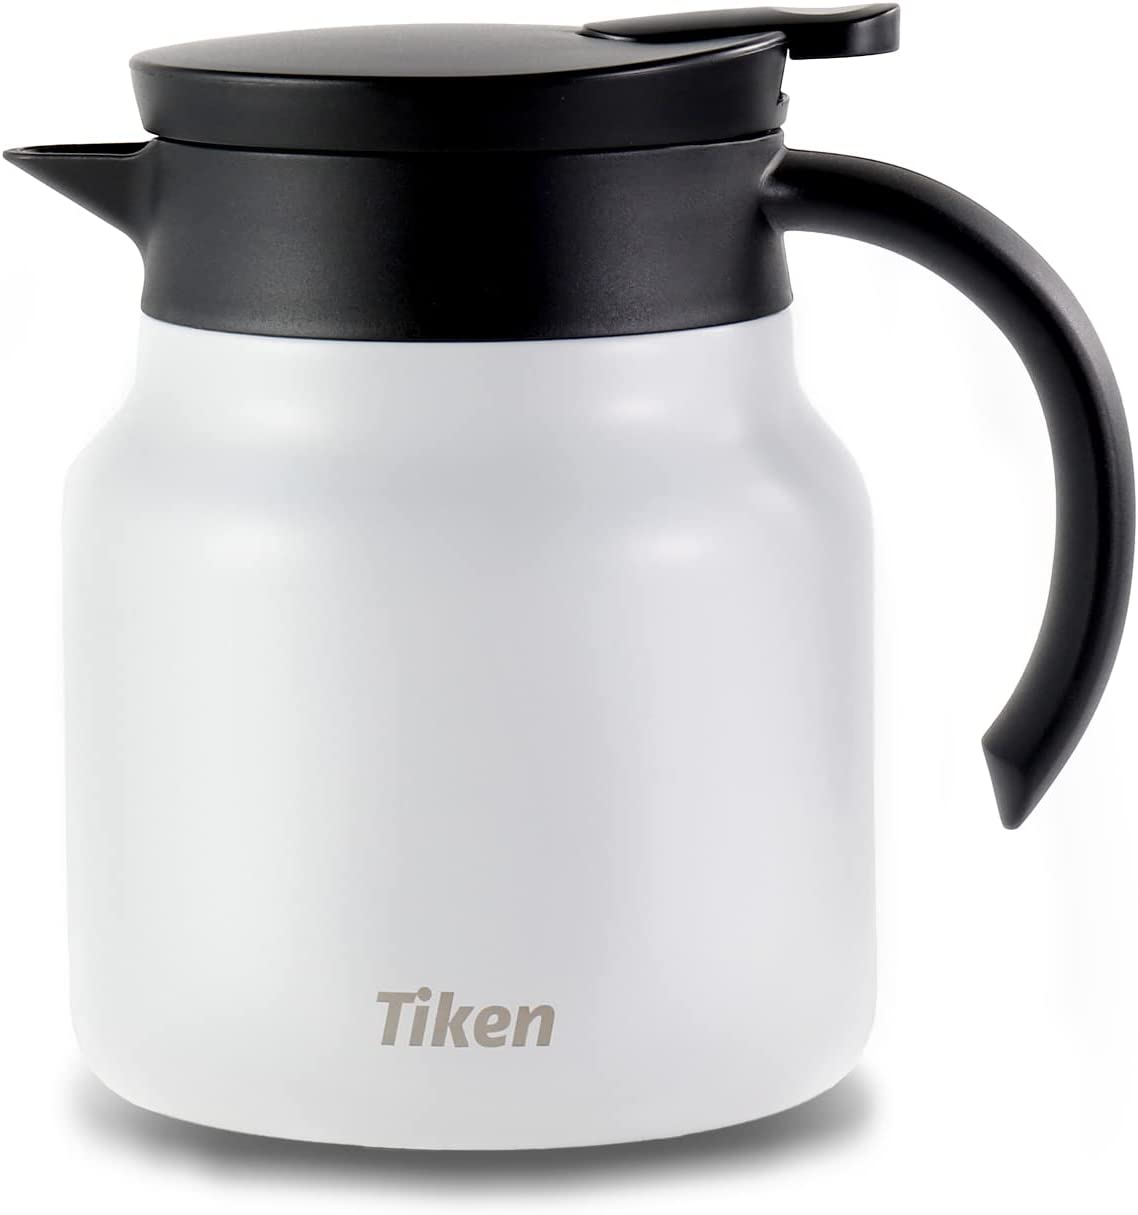 Tiken 27 Oz Thermal Coffee Server Stainless Steel Insulated Vacuum Coffee Carafes, 800ML Beverage Pitcher (White)